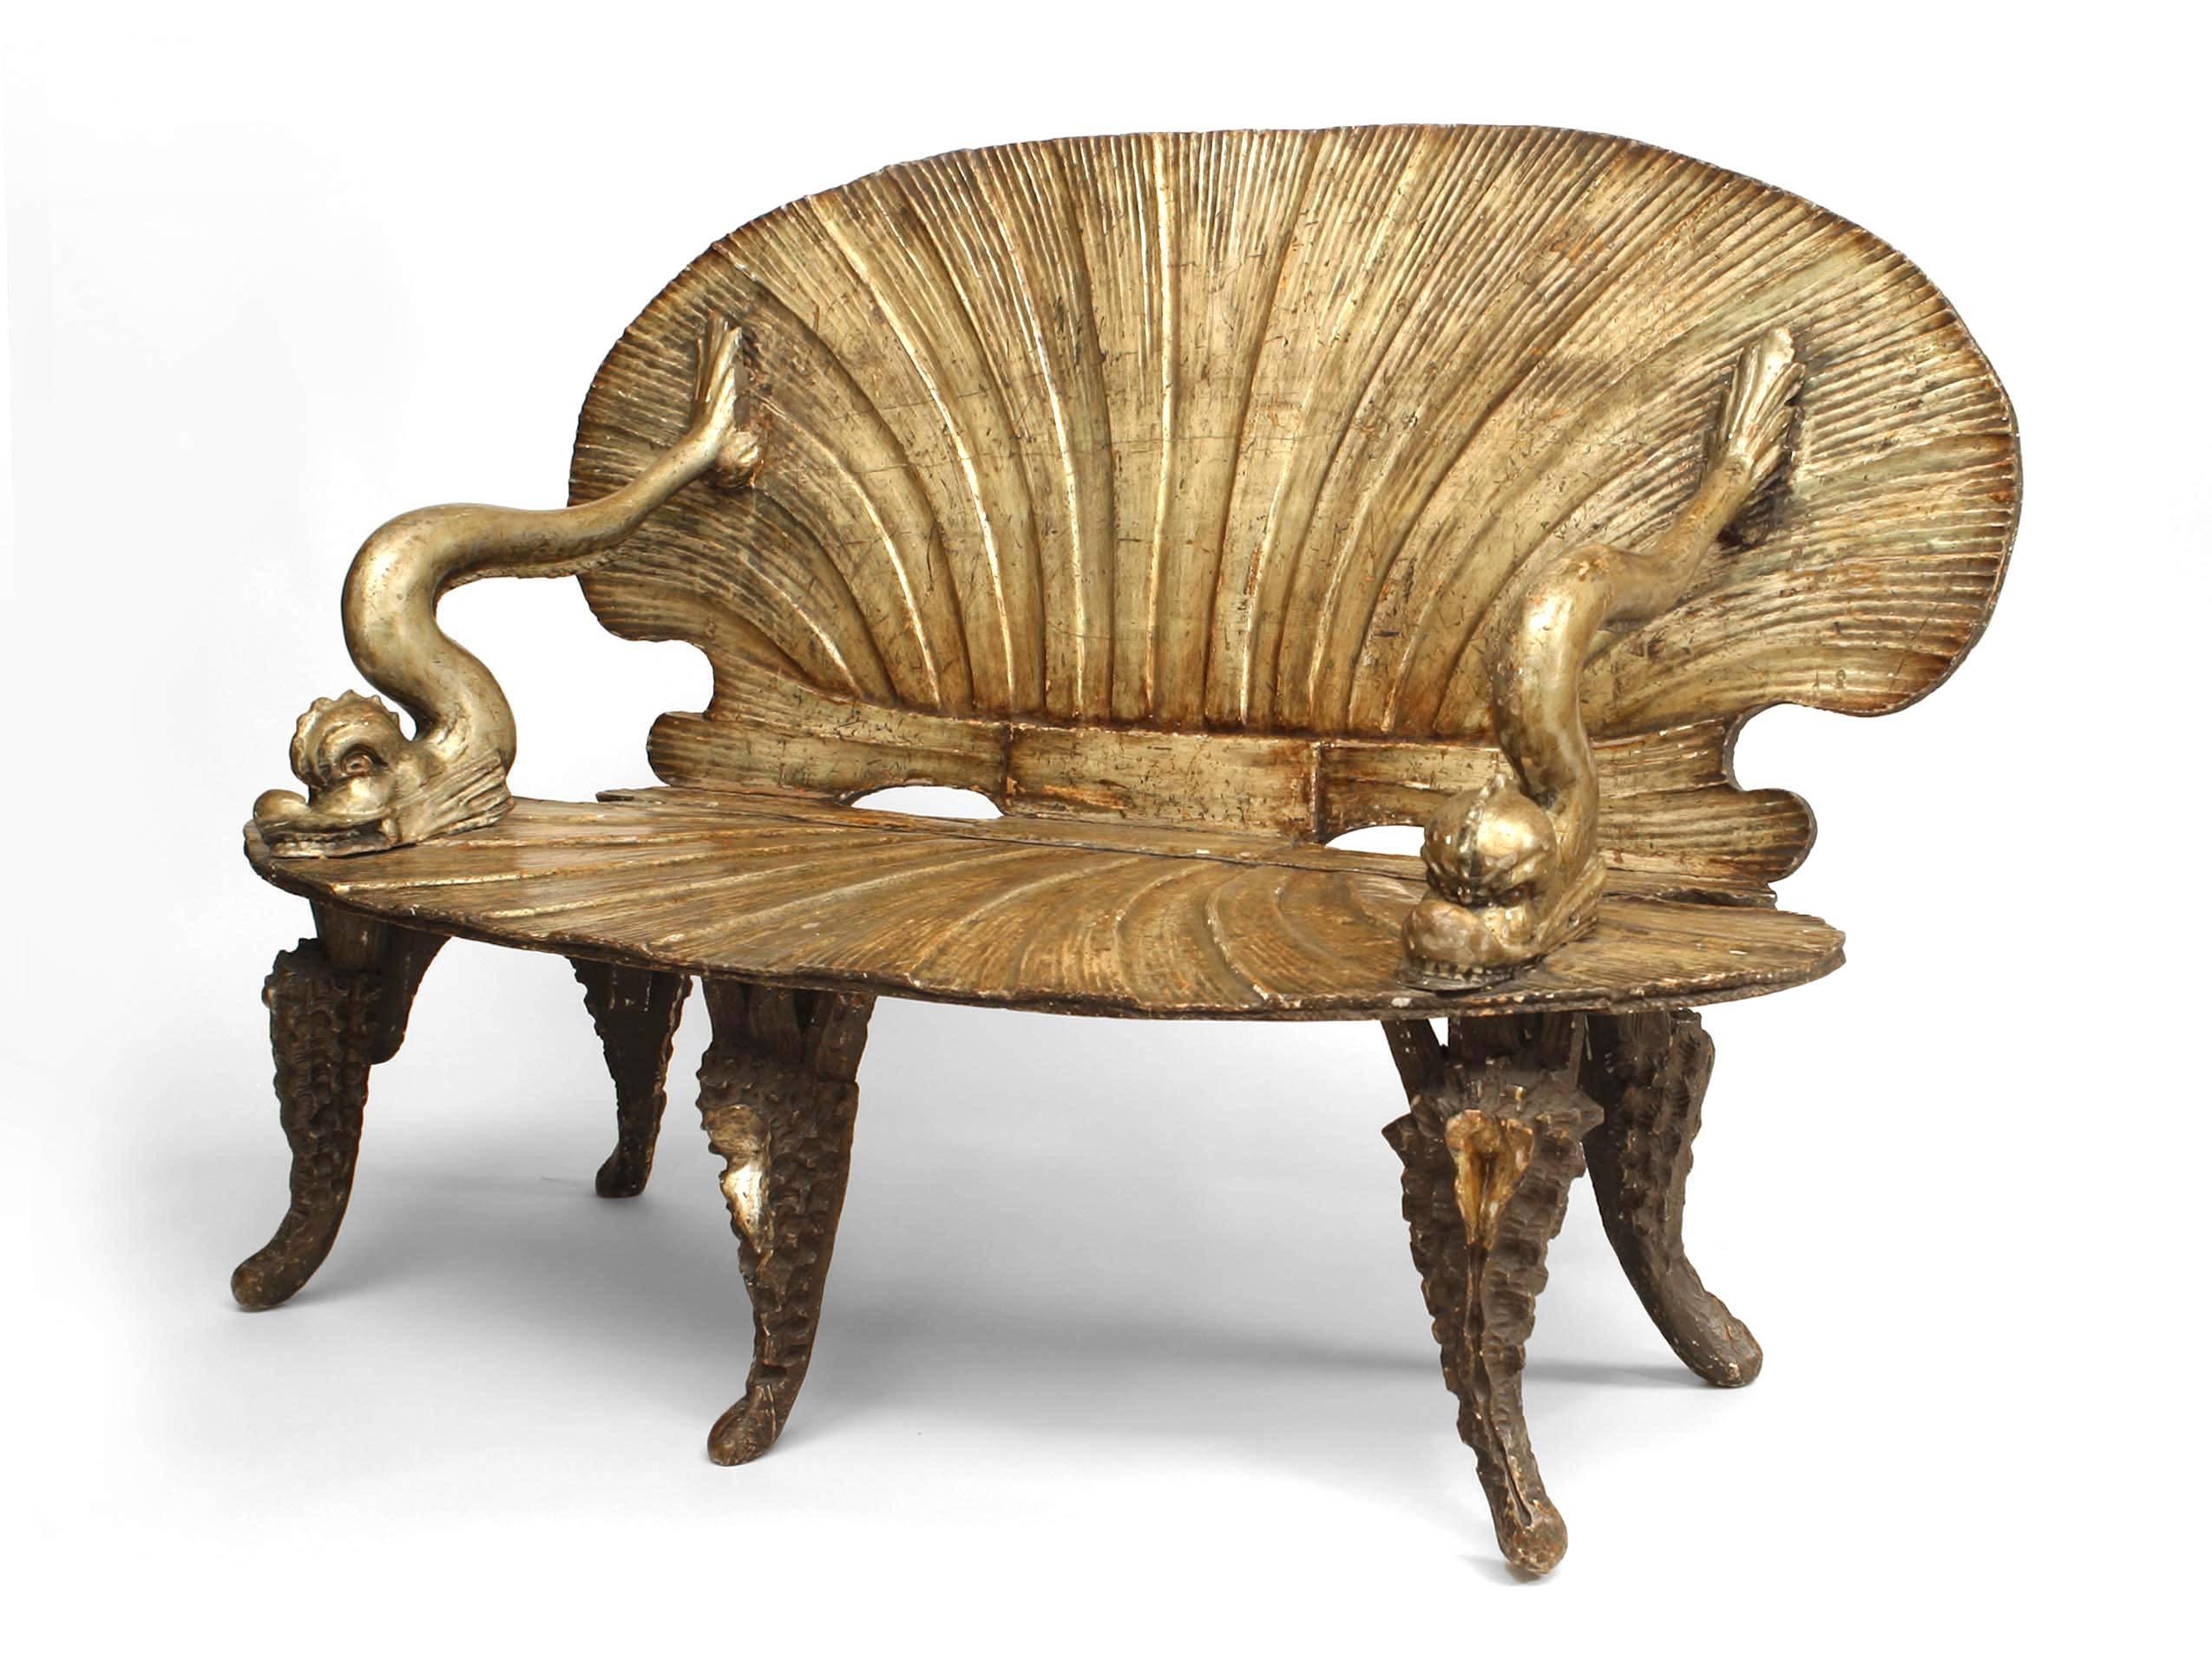 Italian Venetian grotto 19th century silver gilt settee with carved seashell design seat and back and dolphin arms.
 